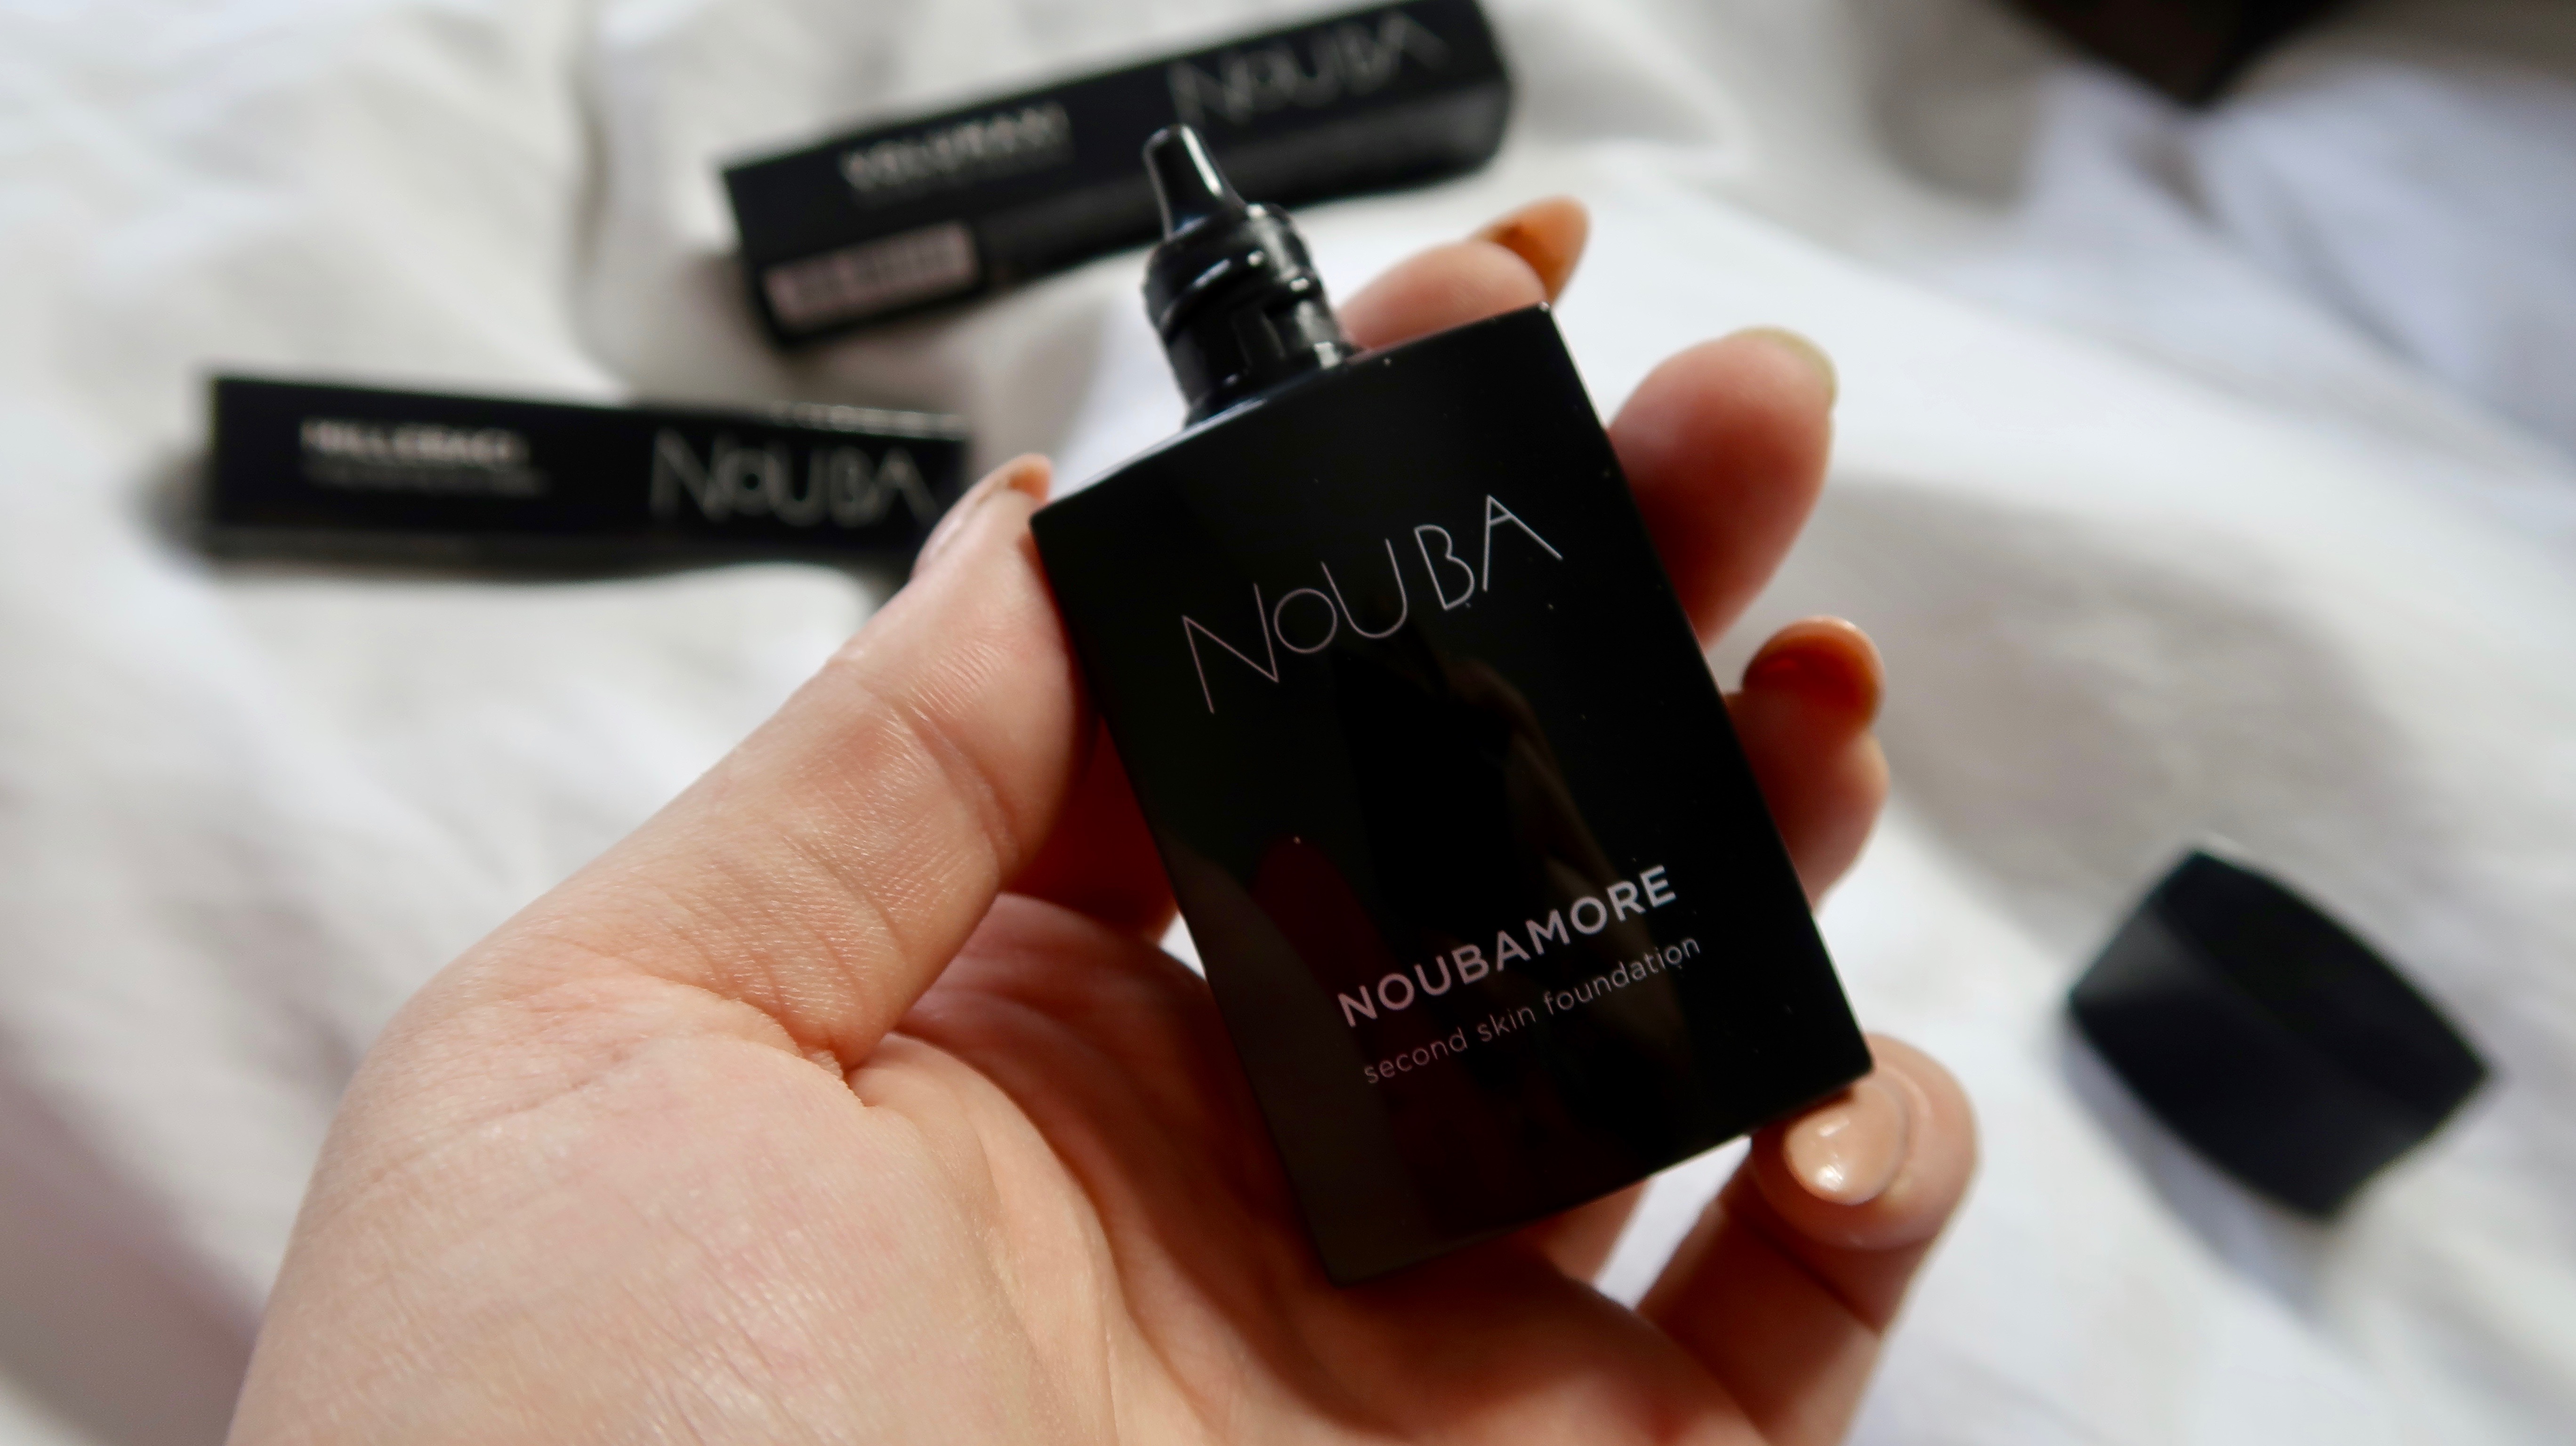 Nouba Beauty Base's newest high end brand is now available | I reviewed this professional make up and gave my thoughts | Elle Blonde Luxury Lifestyle Destination Blog